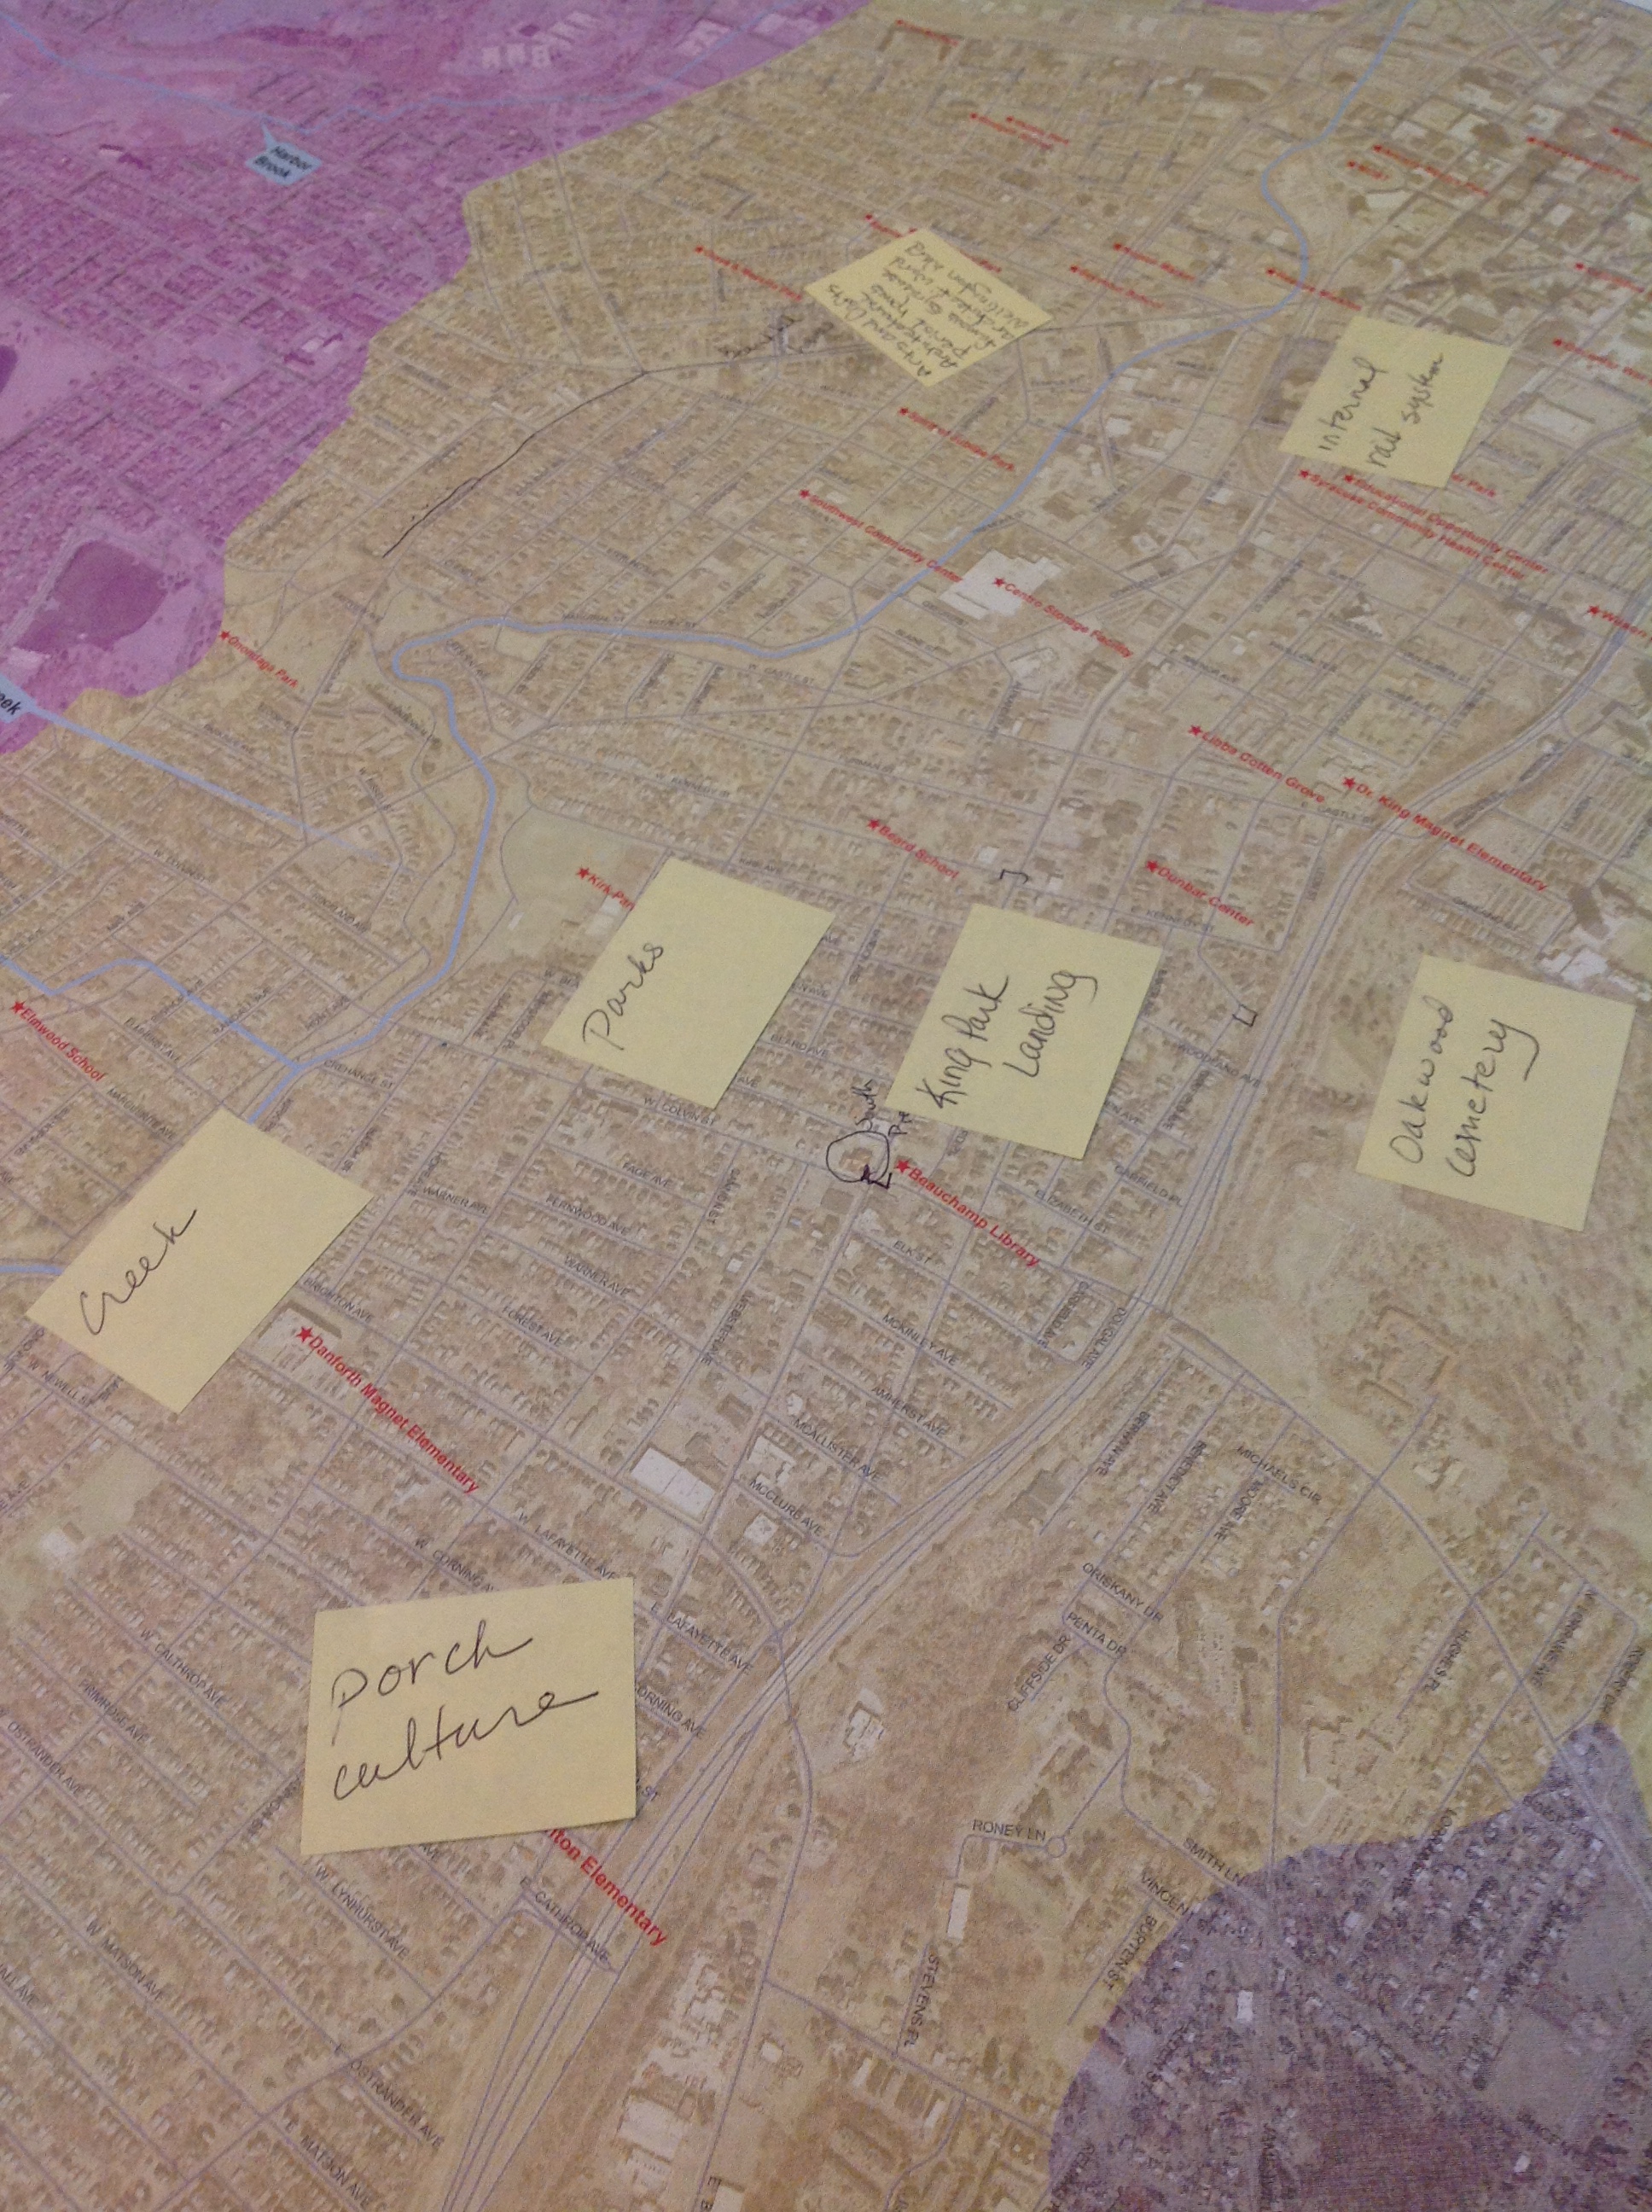 Residents suggests ideas for a artistic map reflective of the South Side neighborhood. 